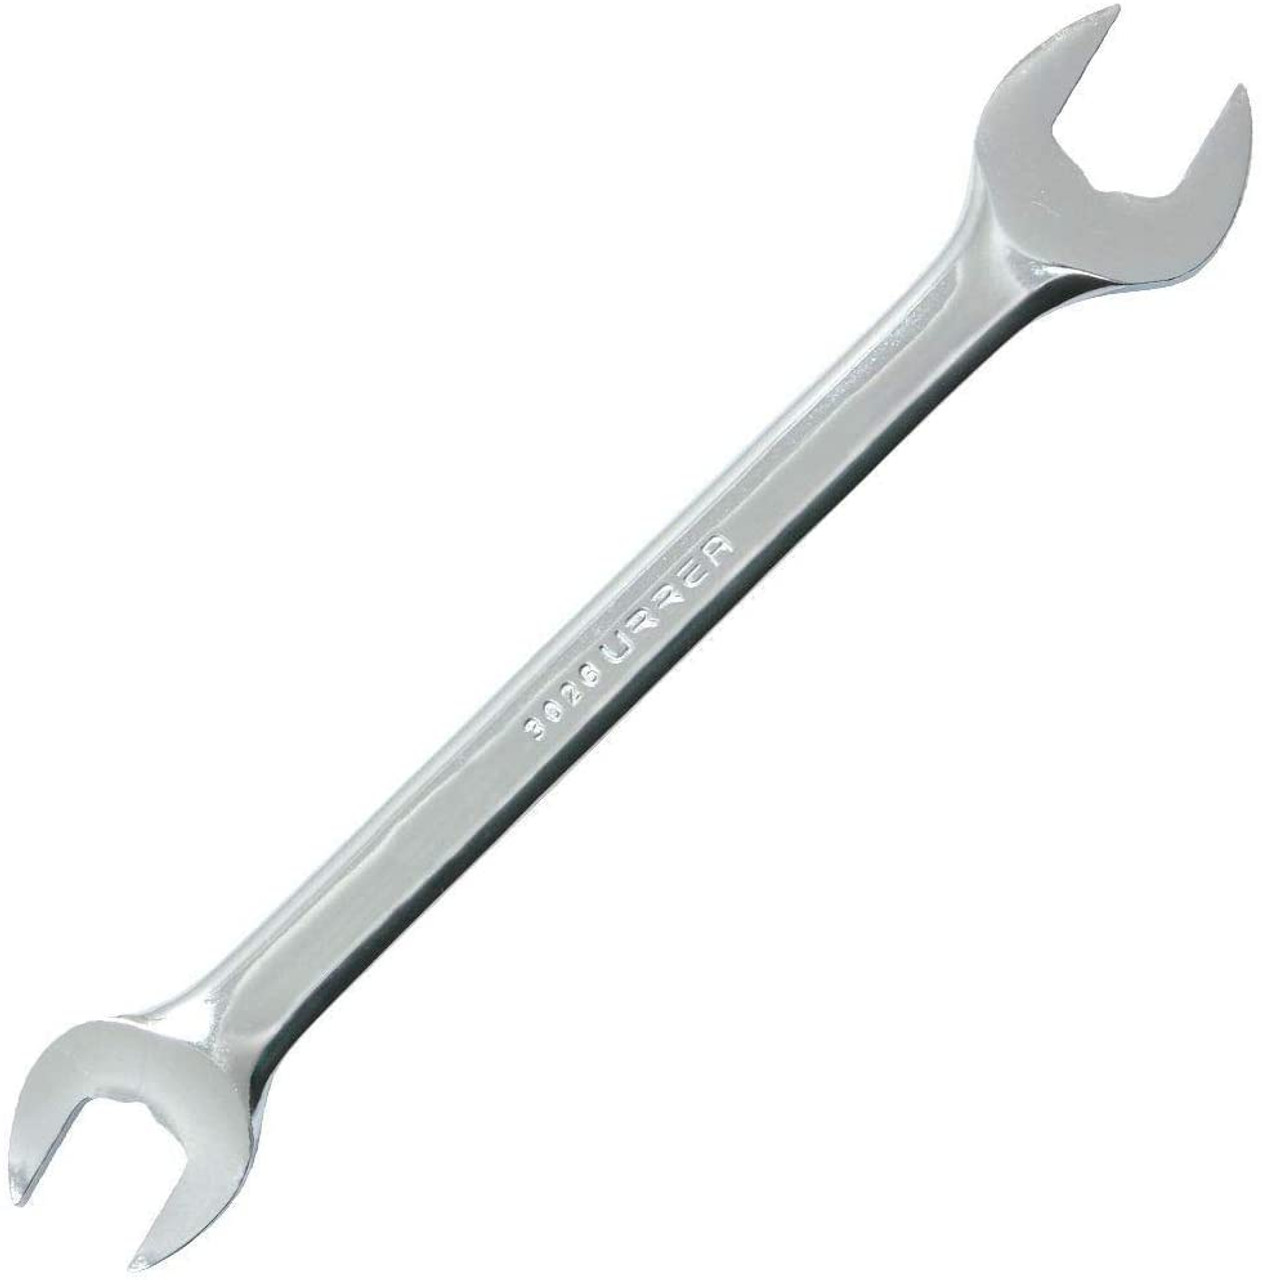 Full polished  Open-End wrench, Size: 15/16x 1, Total Length: 11-3/8"